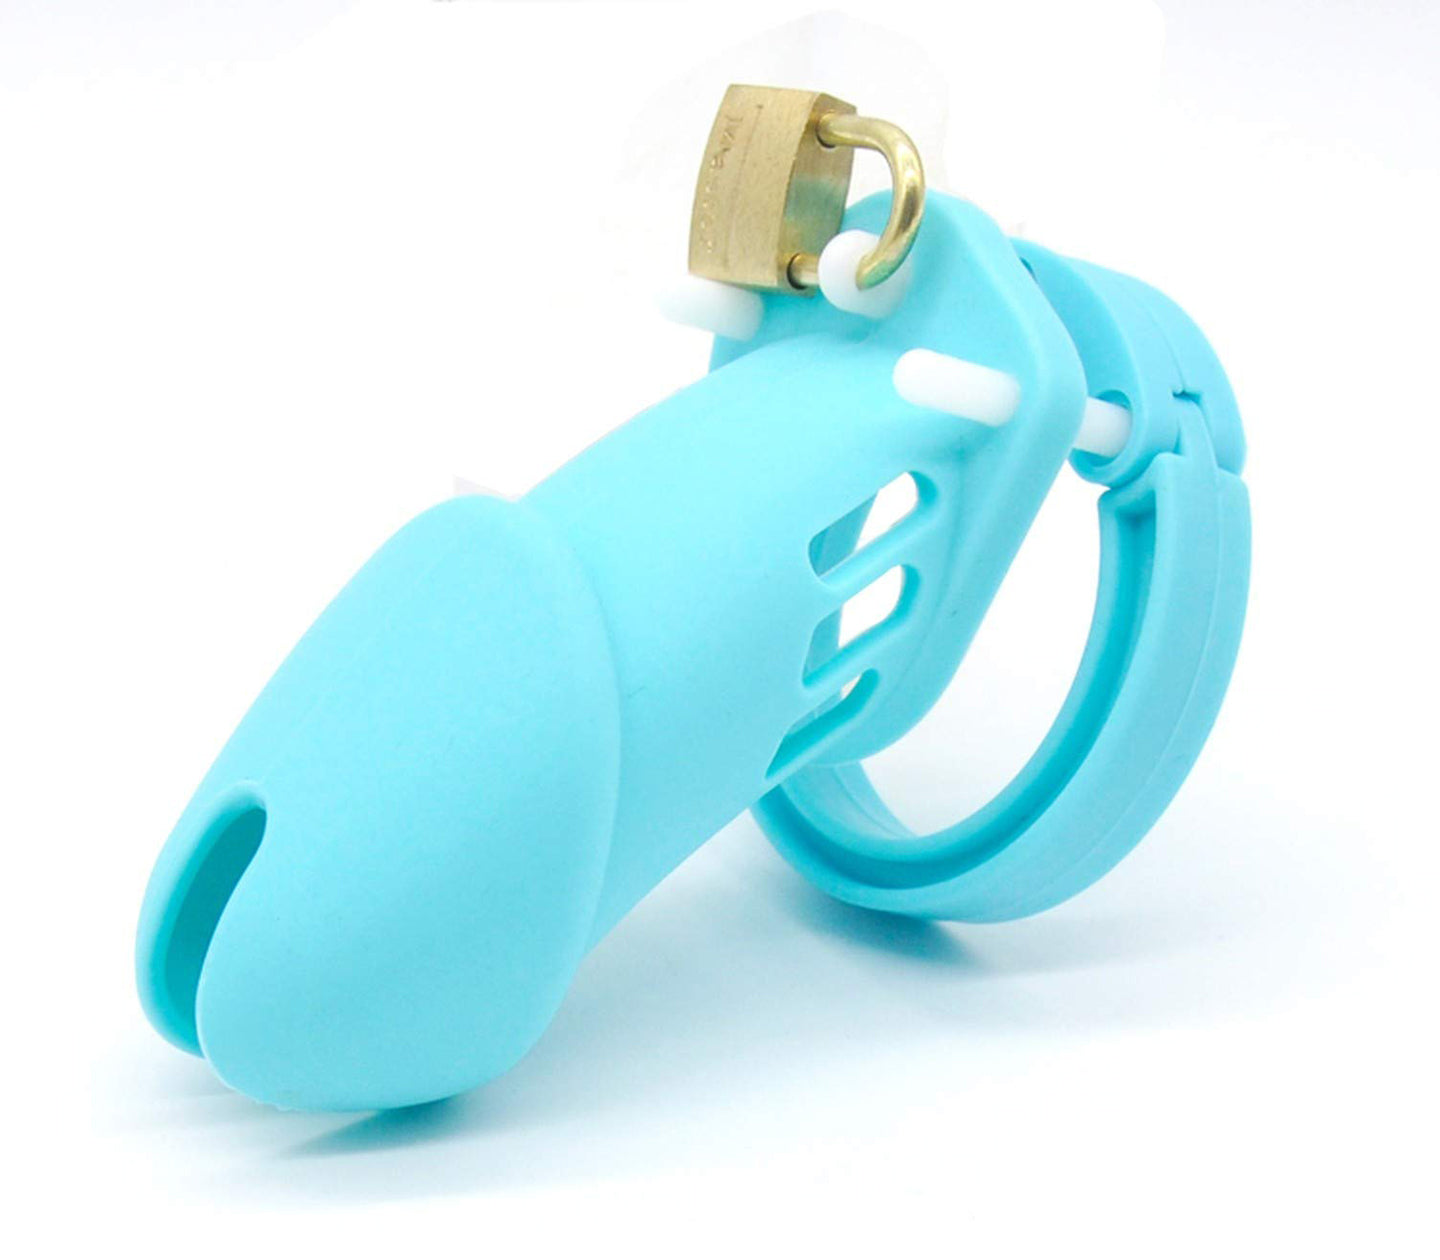 Lil Cockcage 009 Silicone Cock Cages W/ Interchangeable Rings Blue Short - Club X